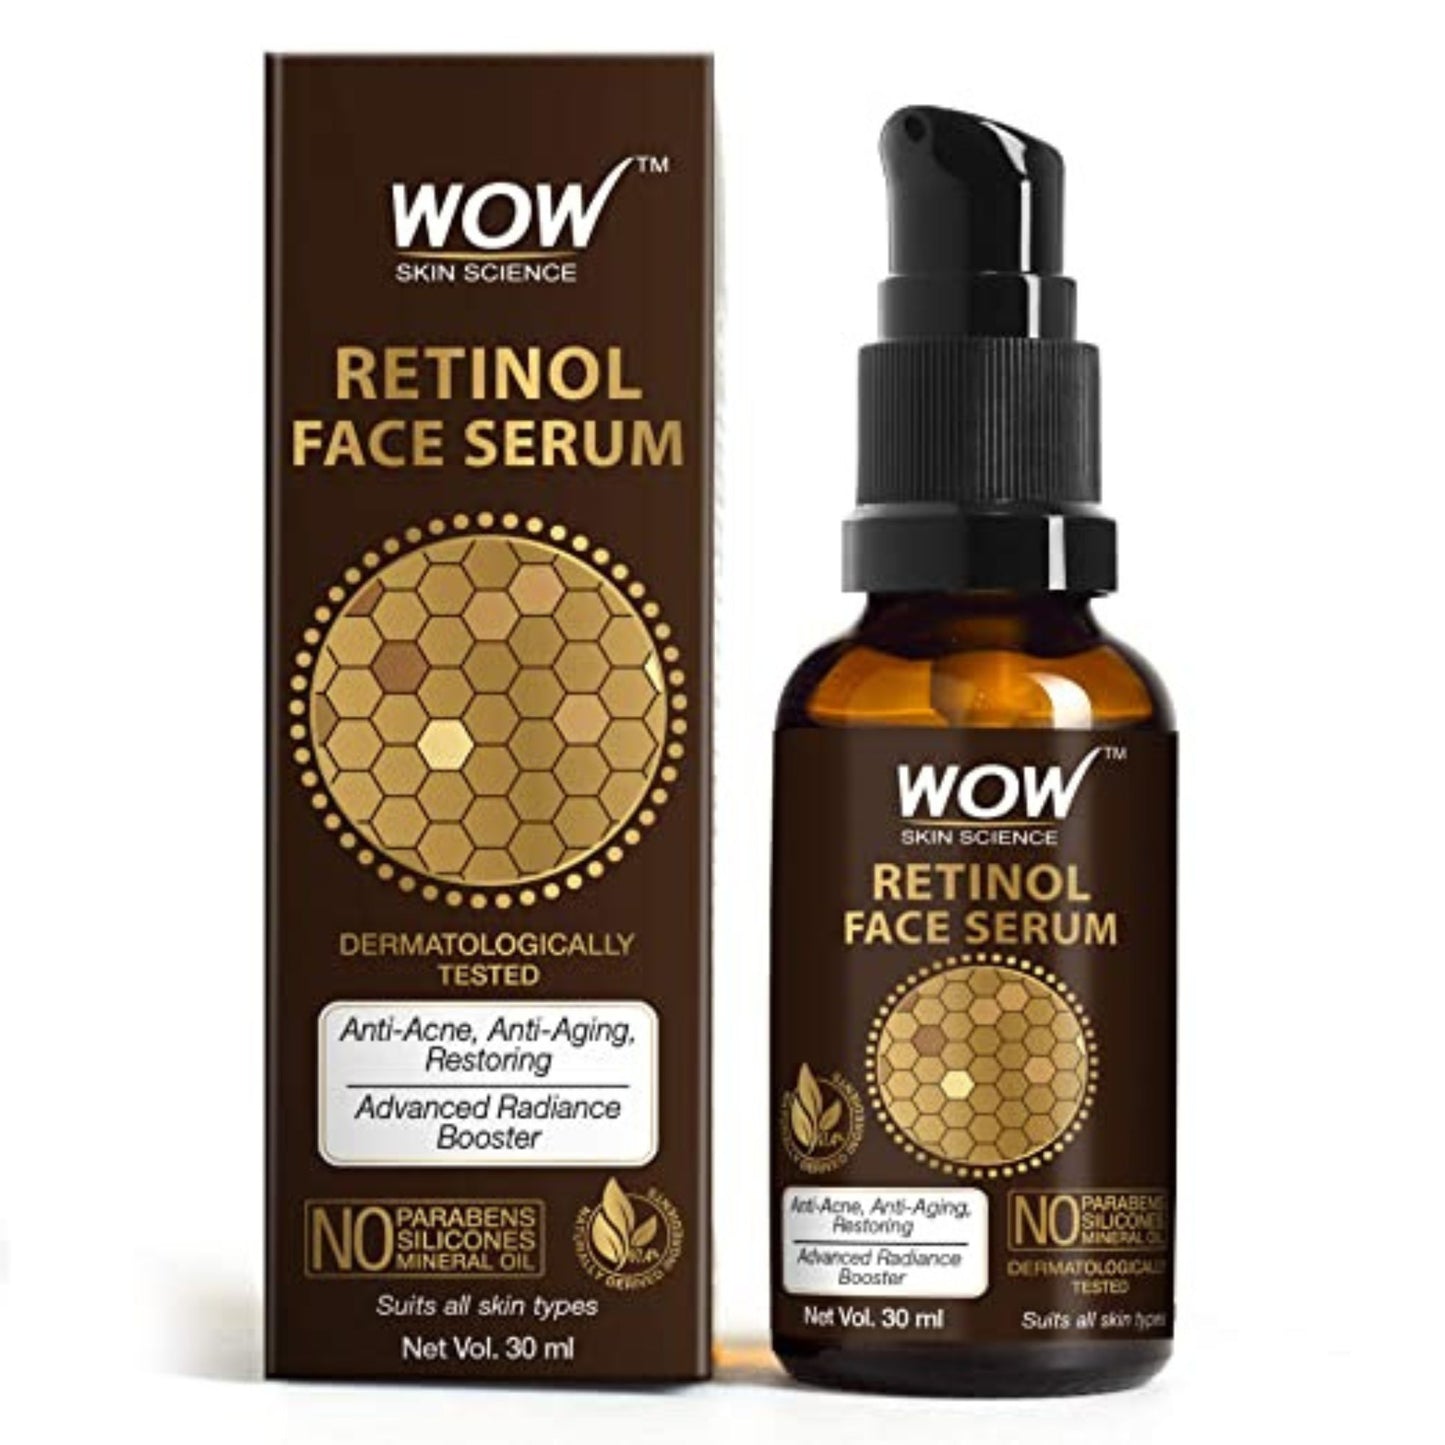 WOW Skin Science Retinol Face Serum - OIL FREE - Skin Plumping, Boost Collagen, Anti Acne, Anti Aging, Restoration - No Parabens, Silicones & Mineral Oil - 30mL